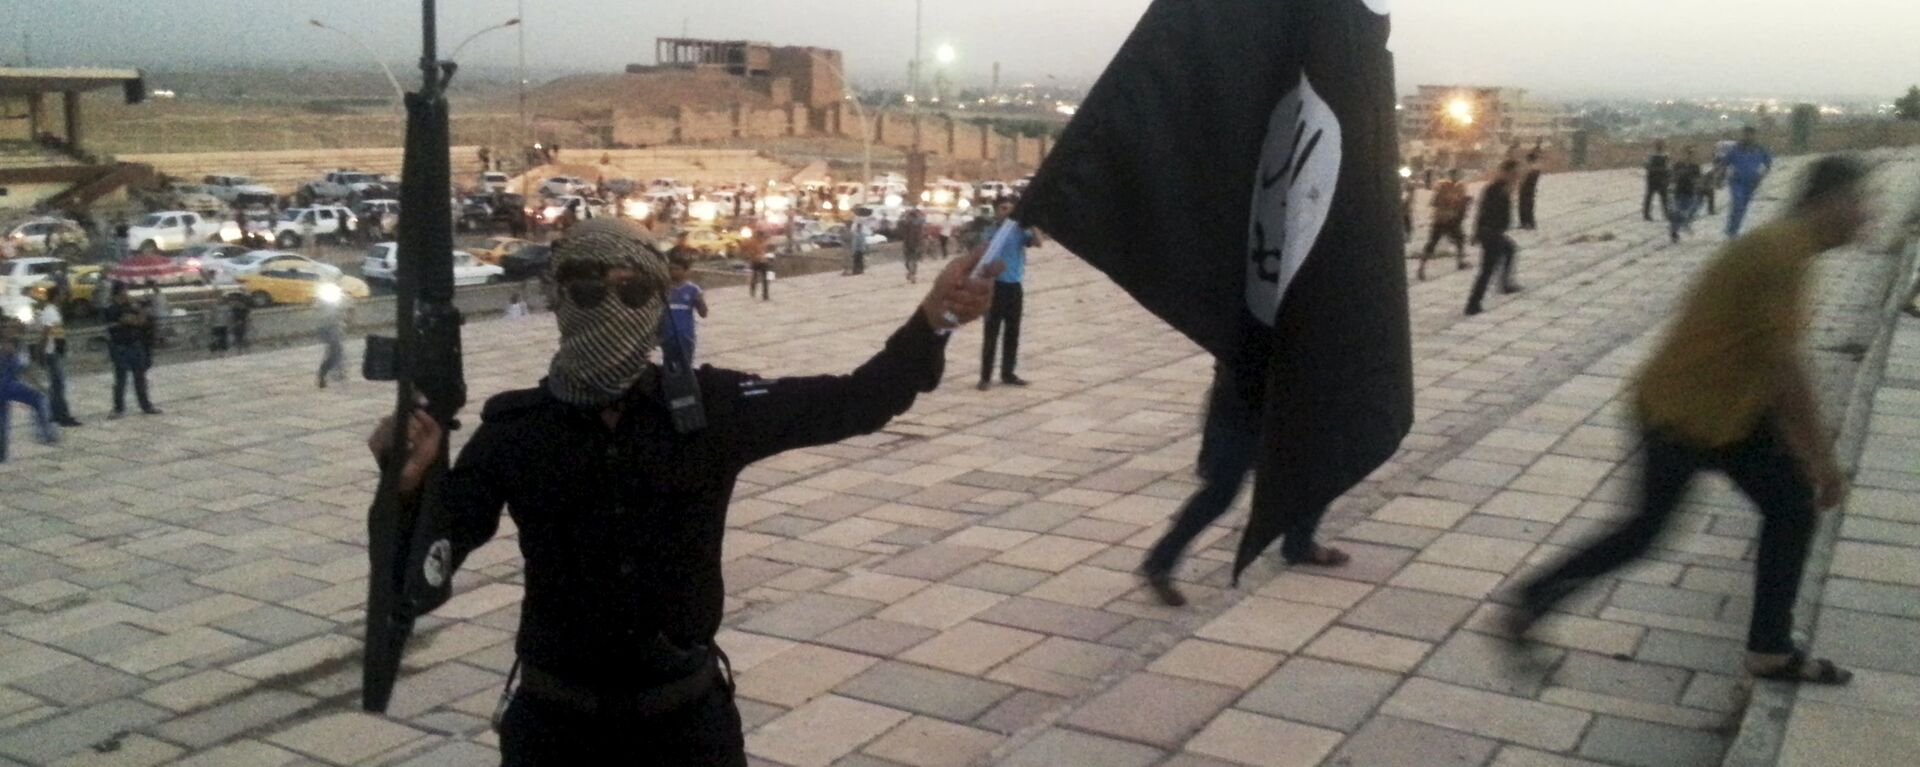 A fighter of Daesh holds an ISIL flag and a weapon on a street in the city of Mosul, Iraq, in this June 23, 2014. - Sputnik International, 1920, 04.08.2018